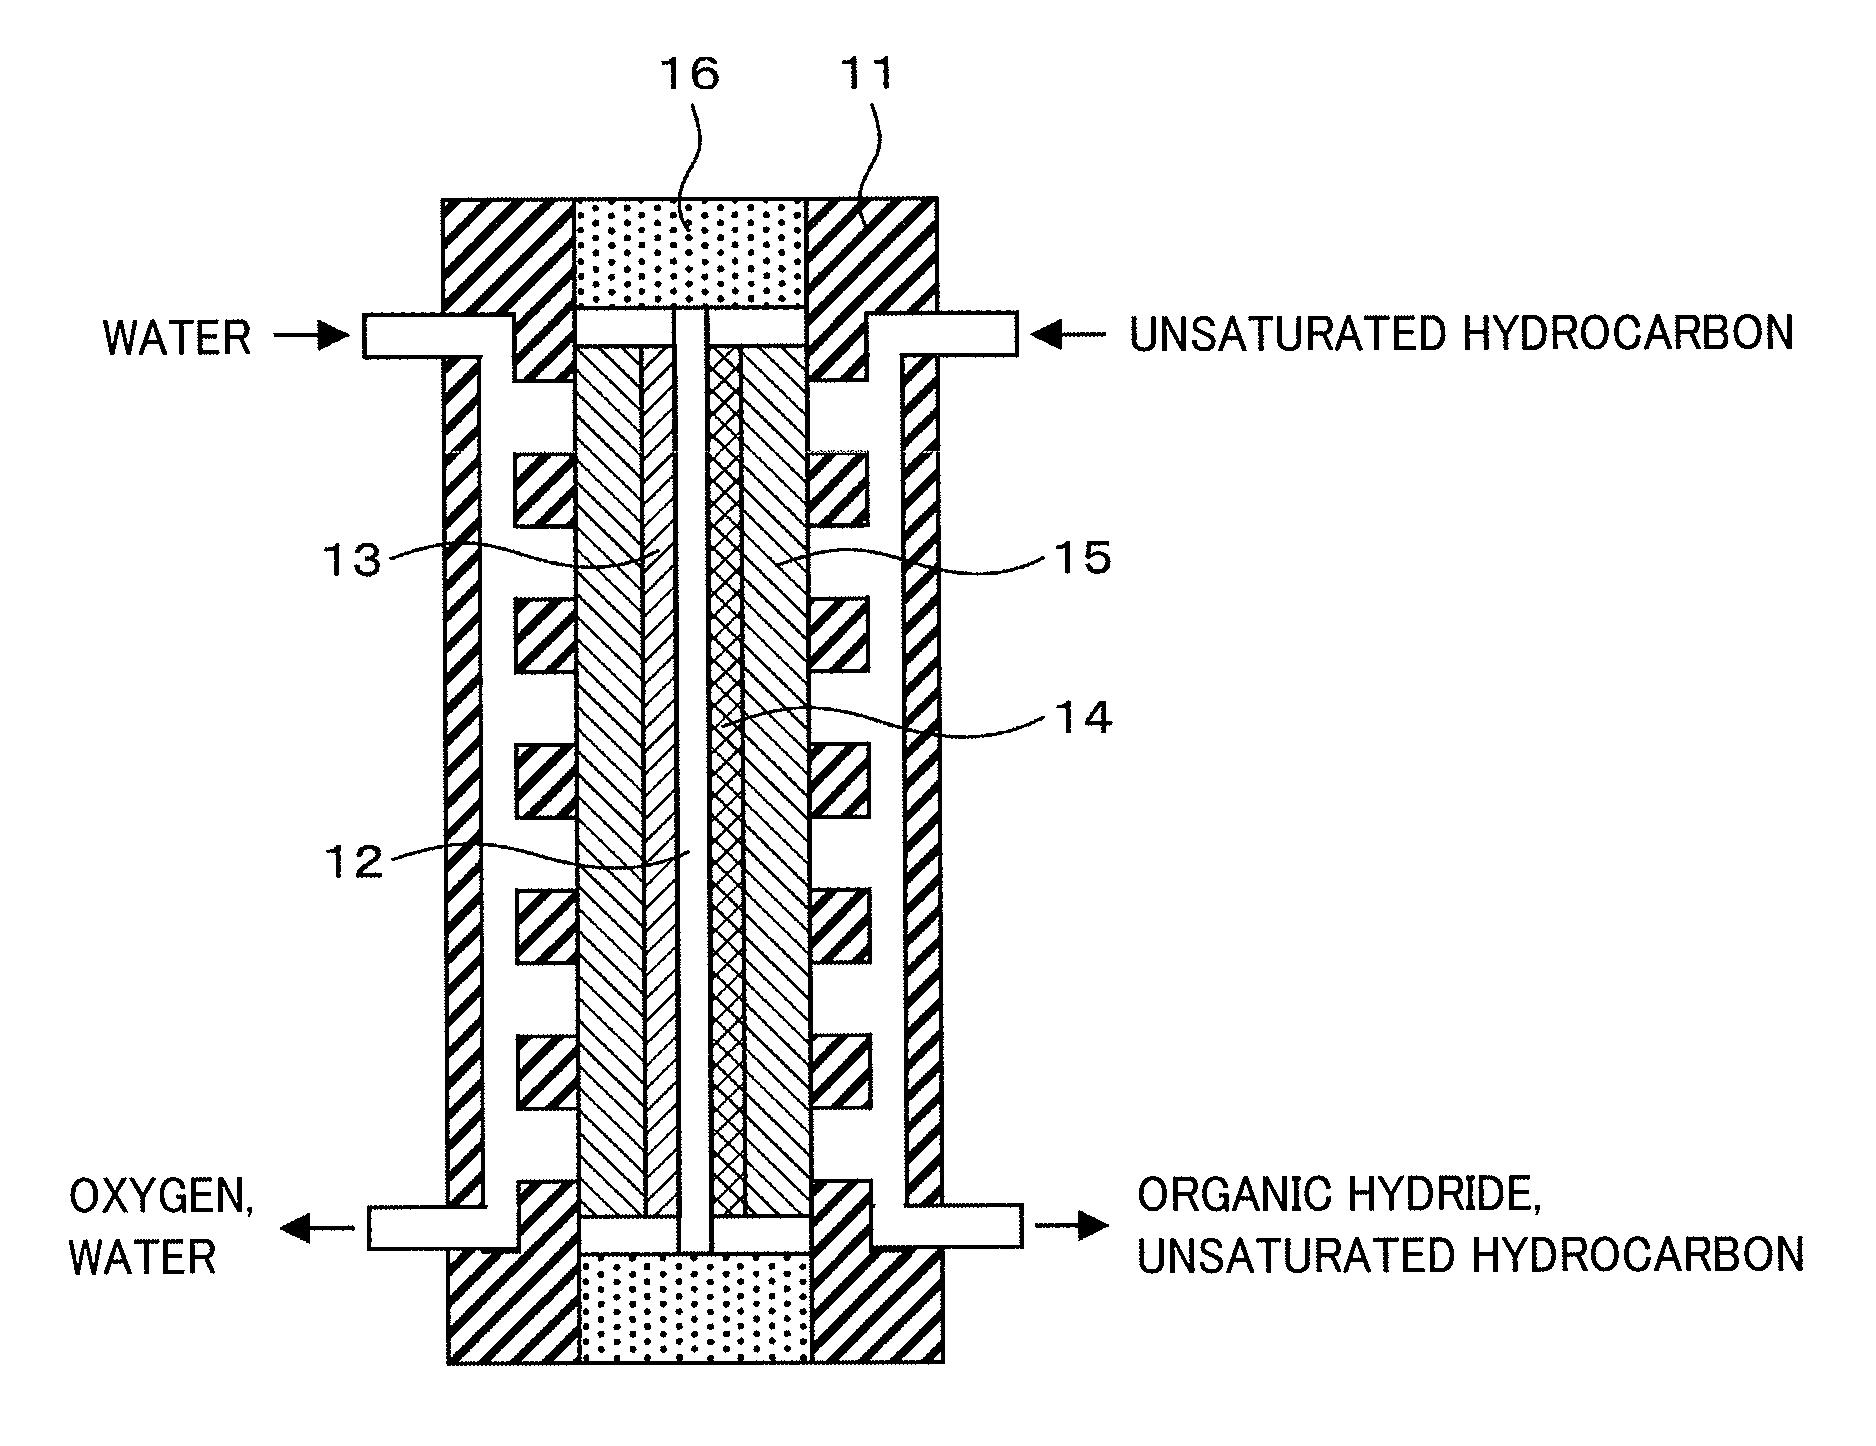 Membrane Electrode Assembly and Organic Hydride Manufacturing Device